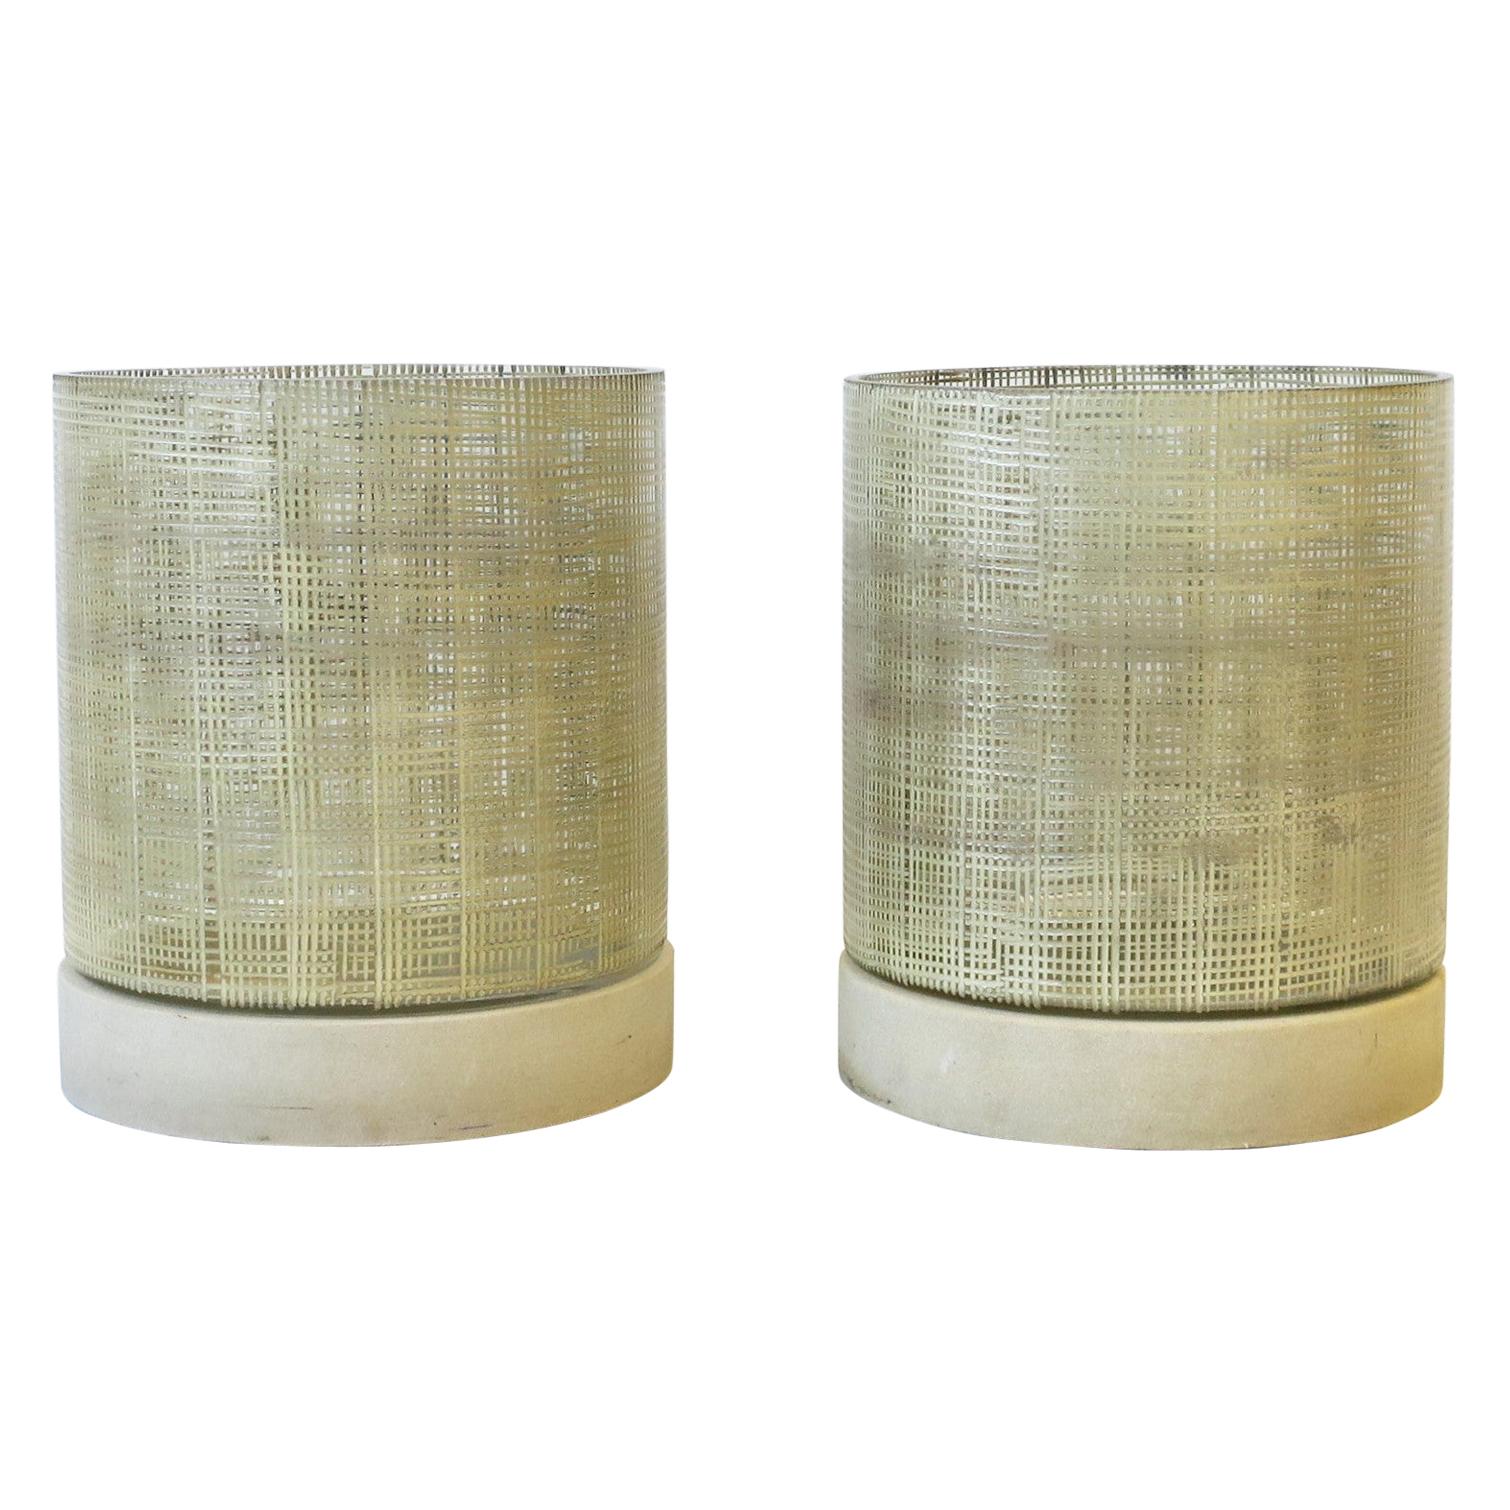 Hurricane Stone and Glass Candle Lamps, Pair